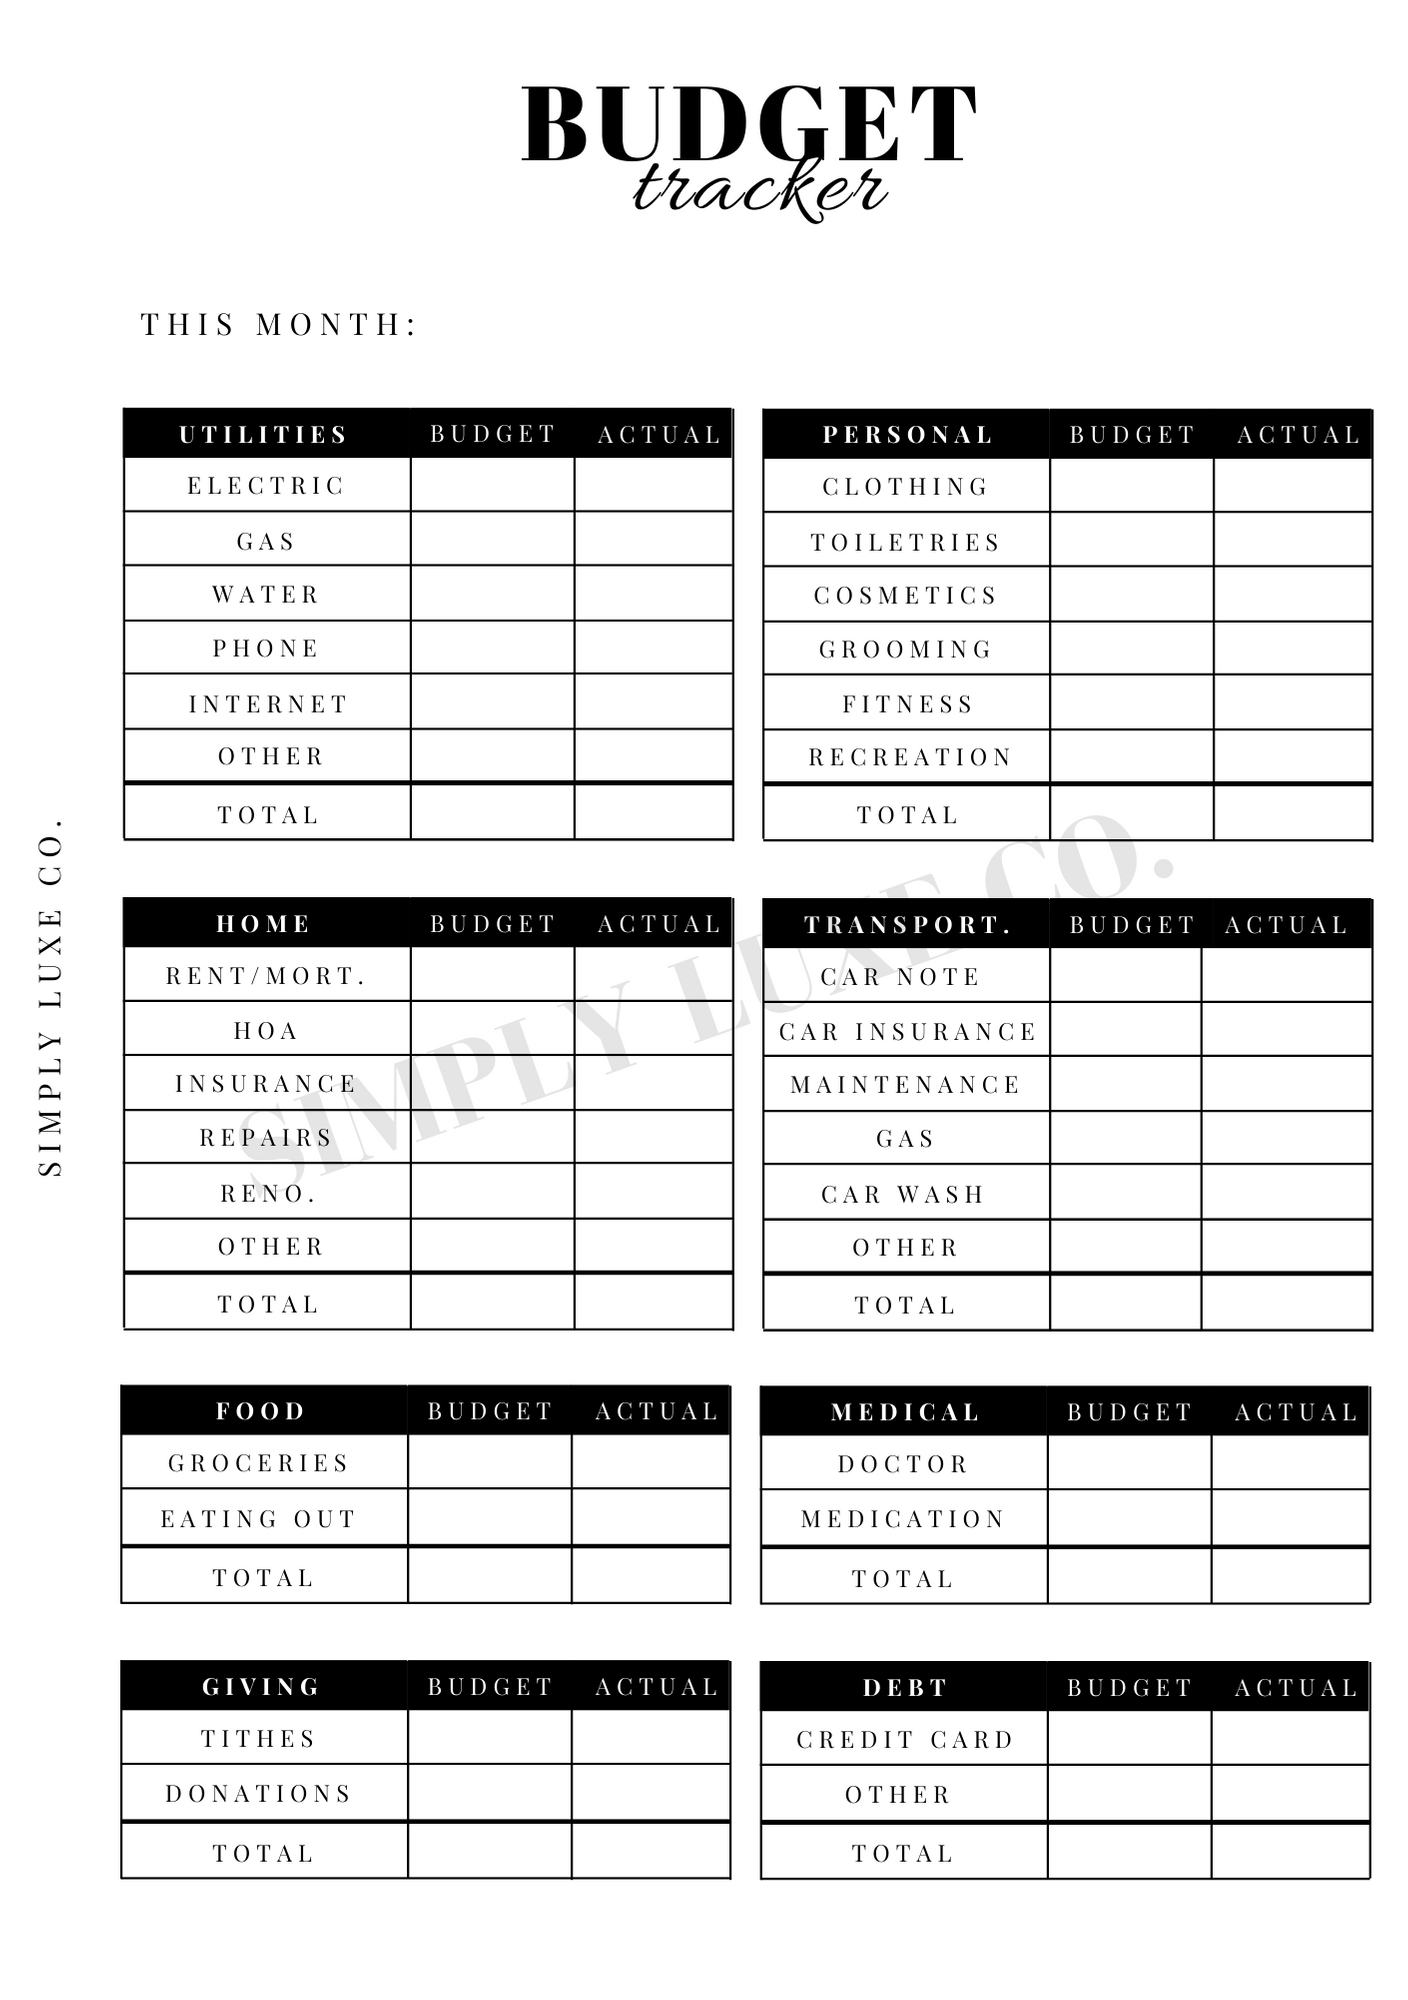 Monthly Budget Tracker Printable